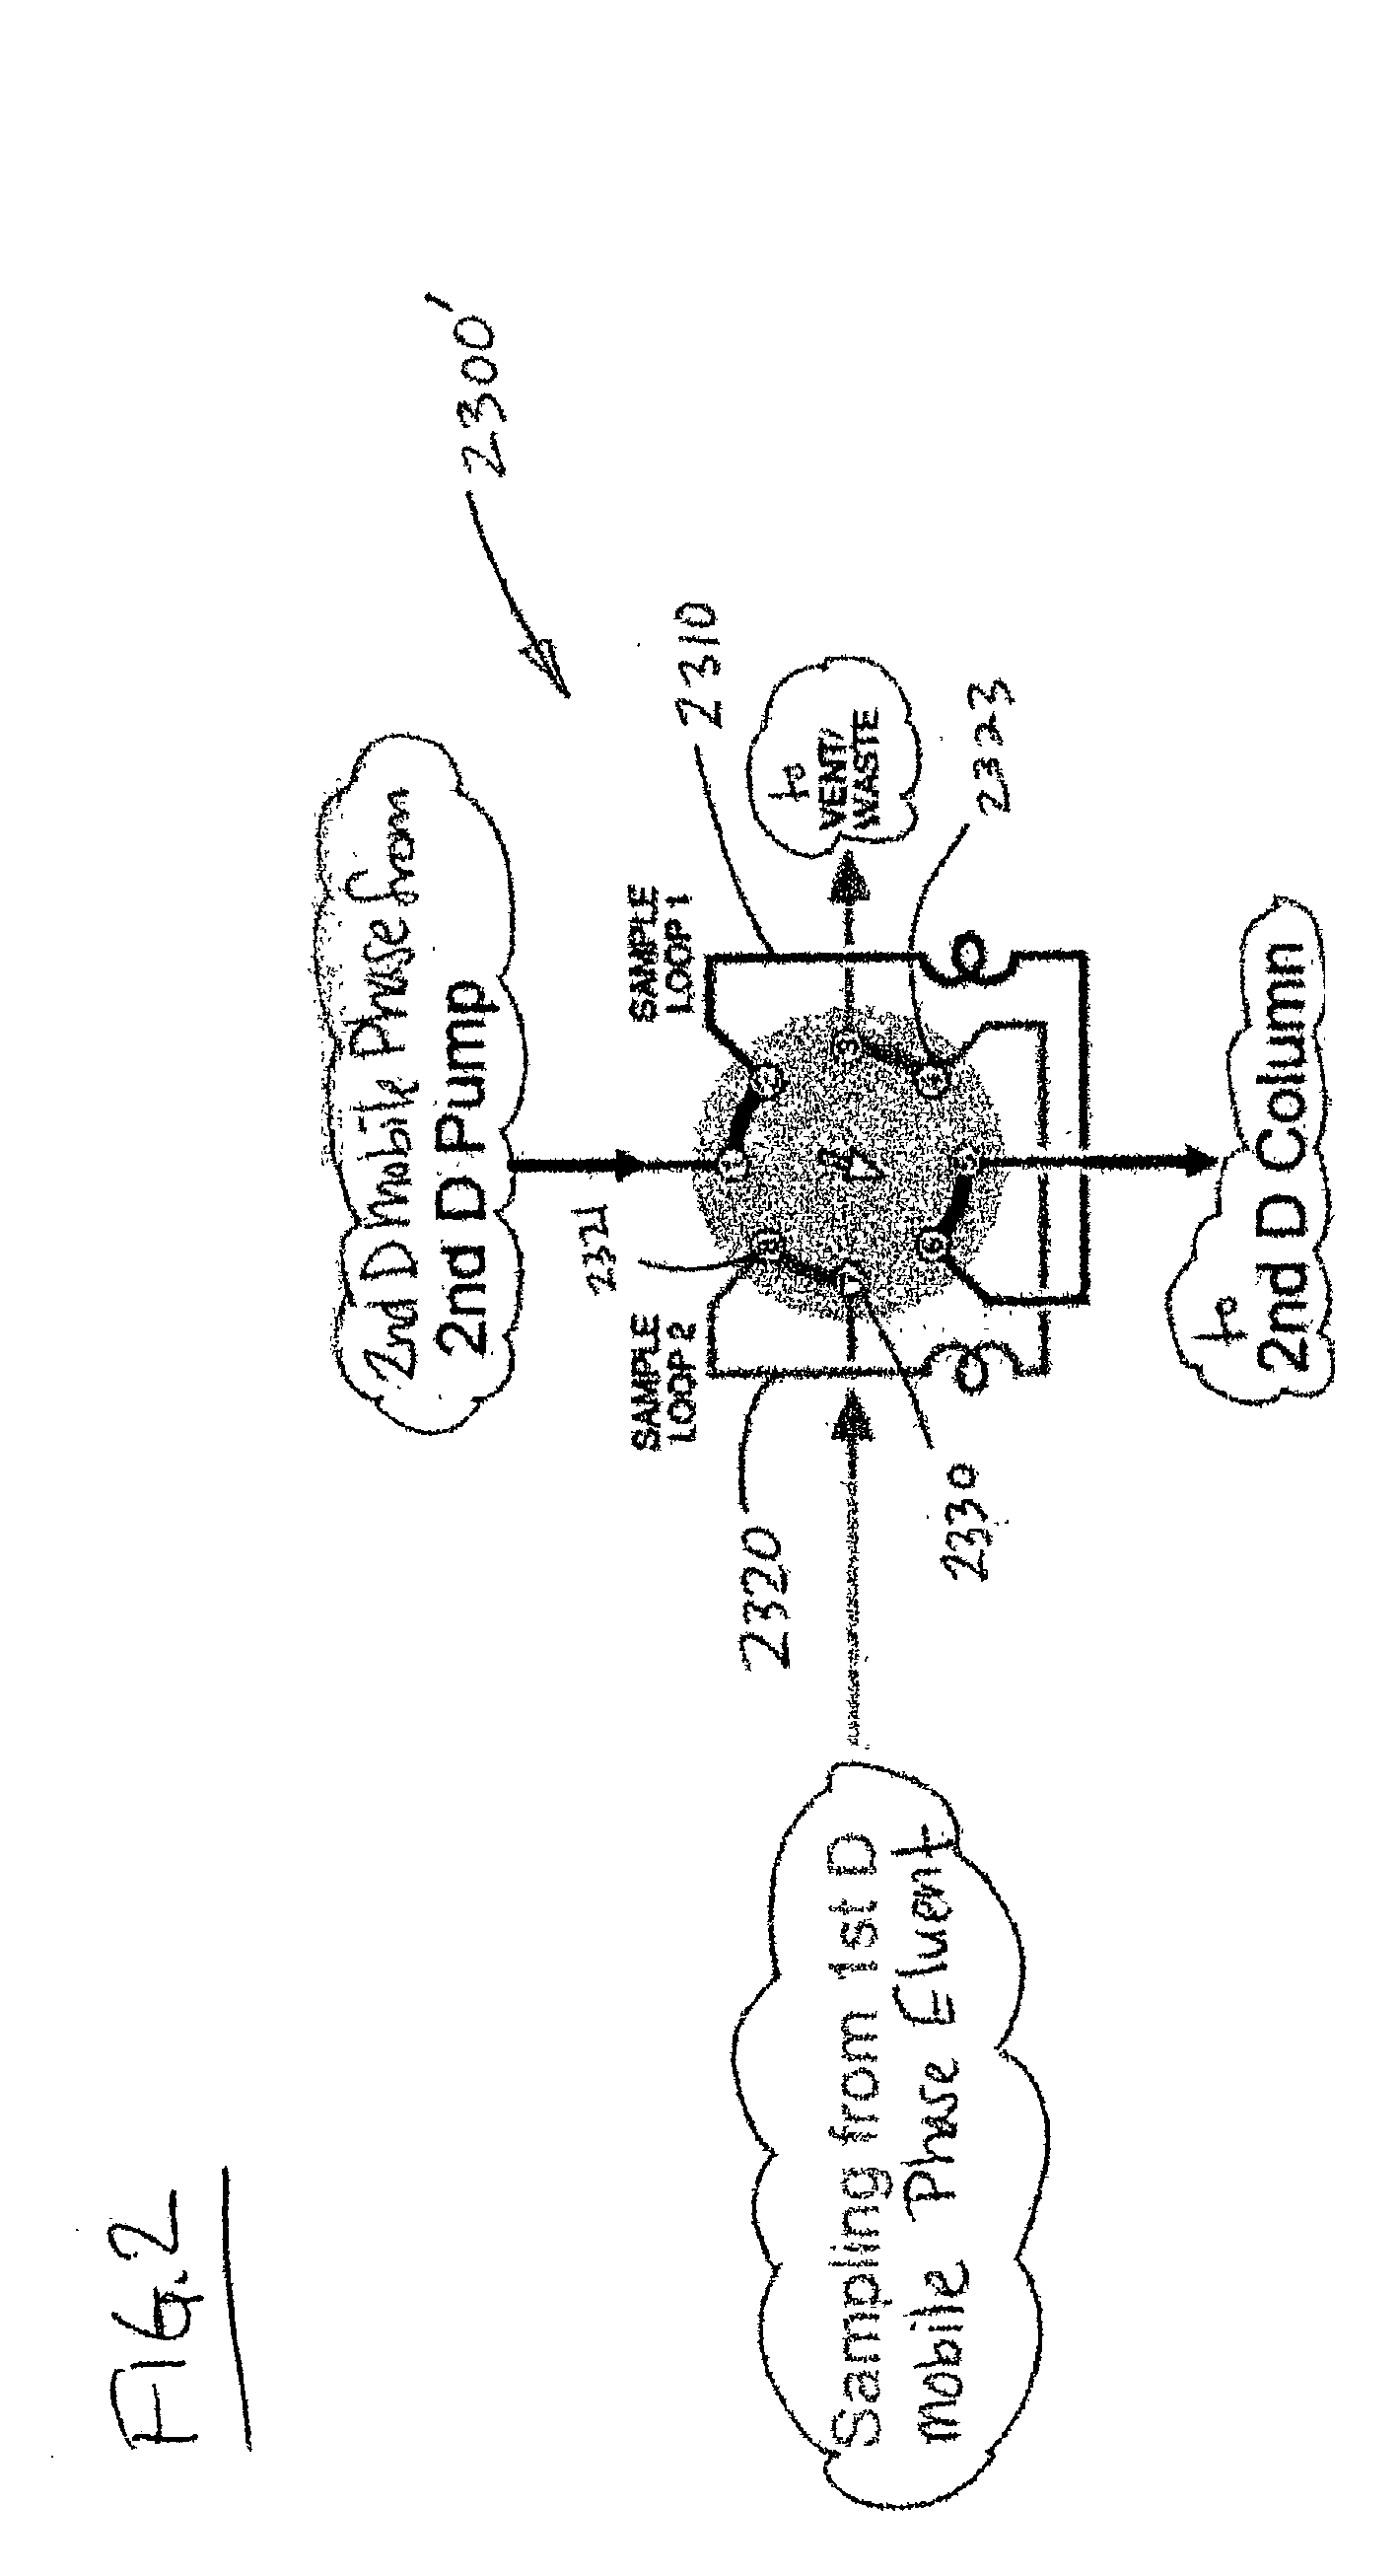 Methods and apparatus for characterization of polymers using multi-dimensional liquid chromatography with parallel second-dimension sampling